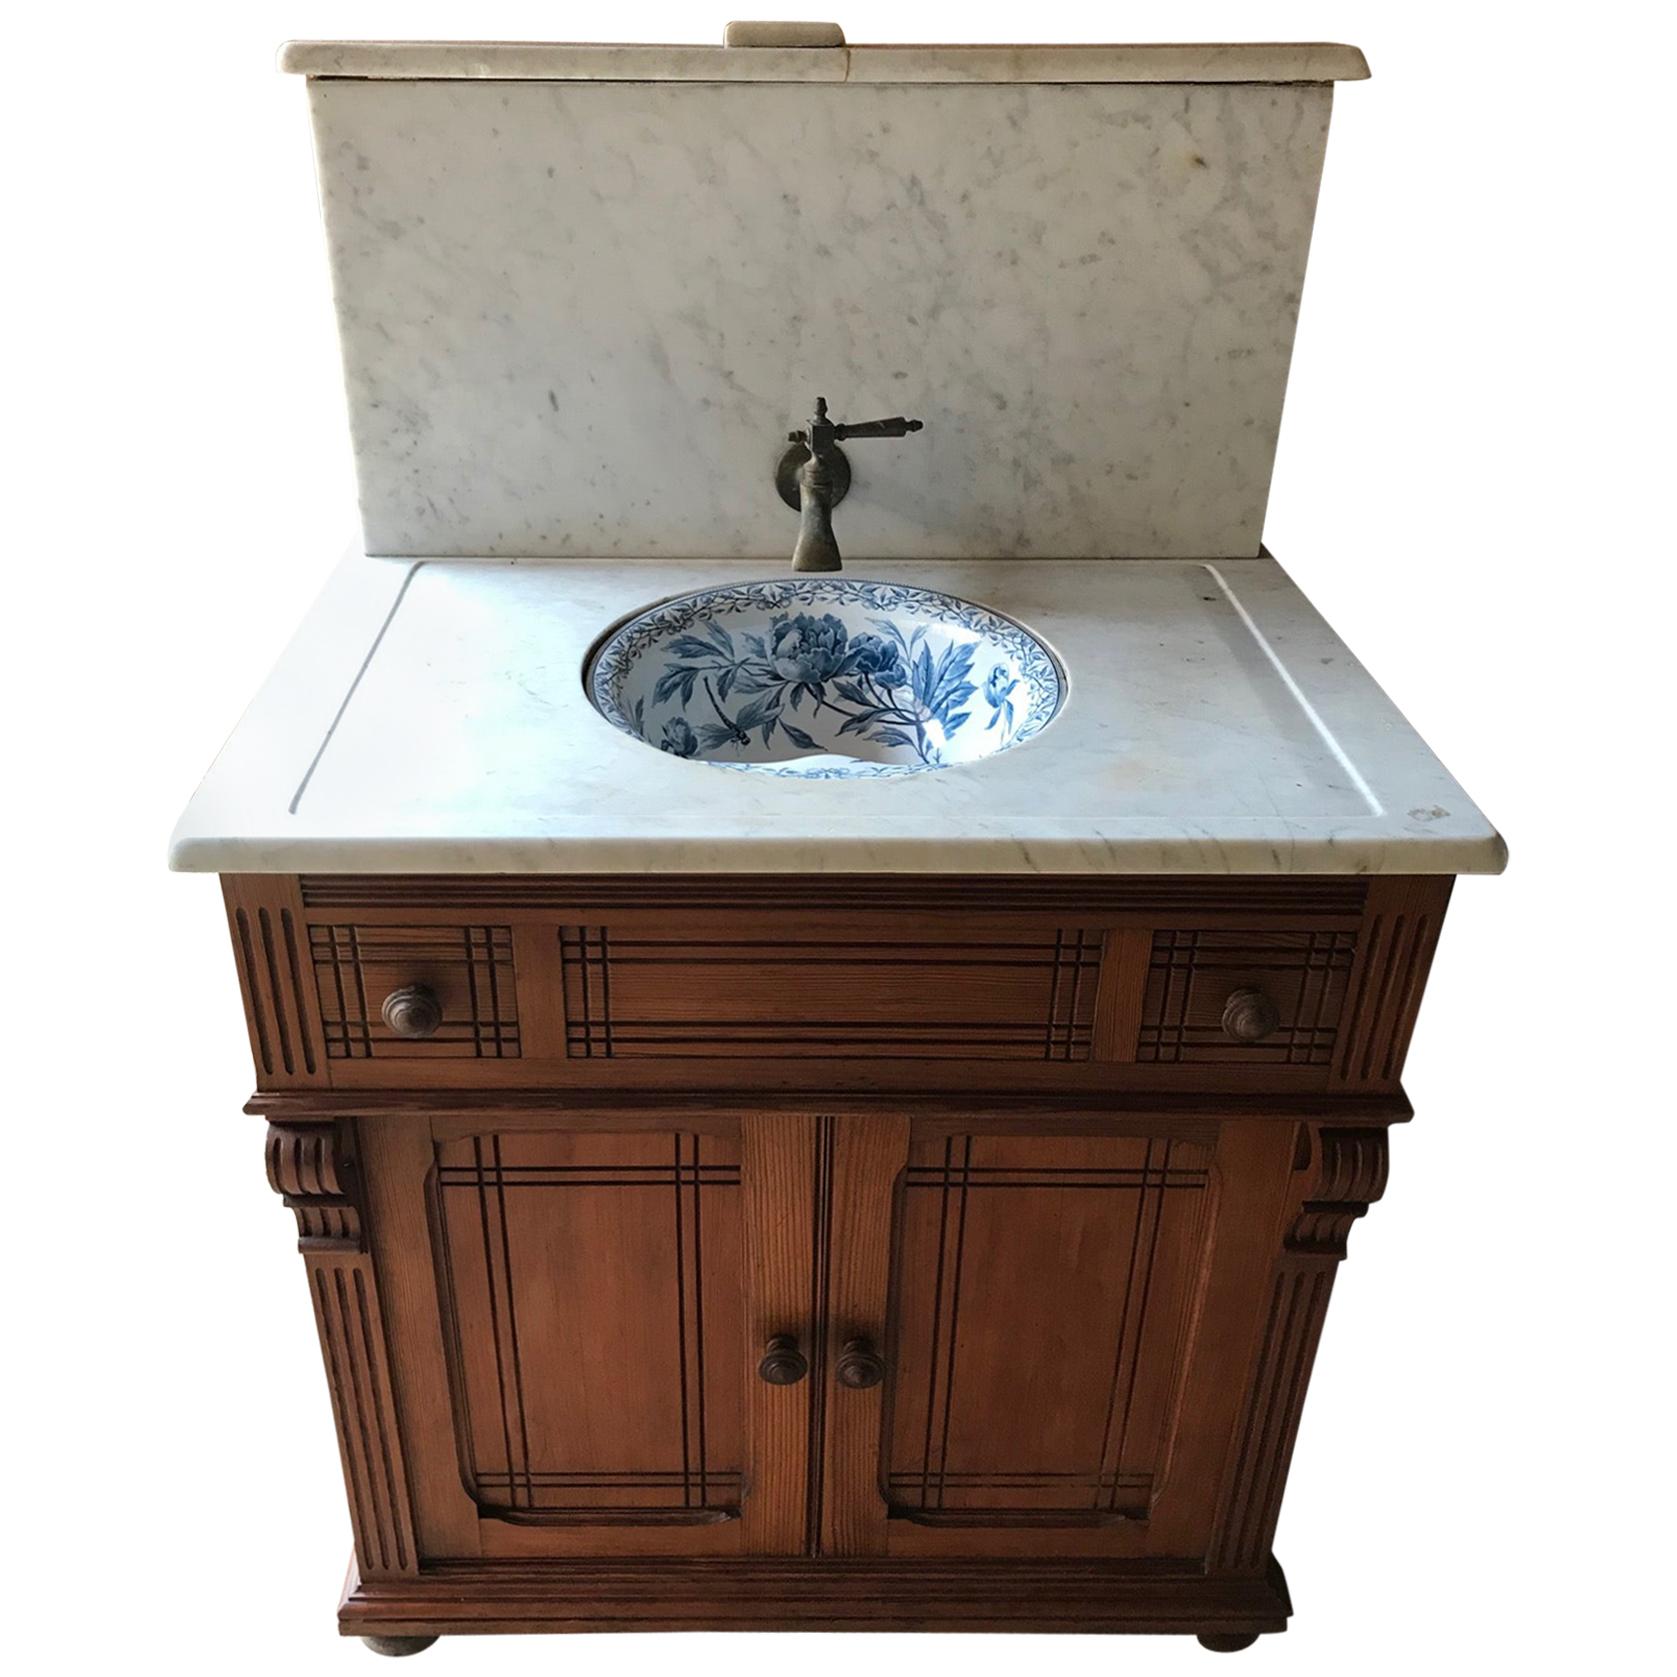 20th Century French Pitch Pine and Marble-Top Bathroom Cabinet, 1920s